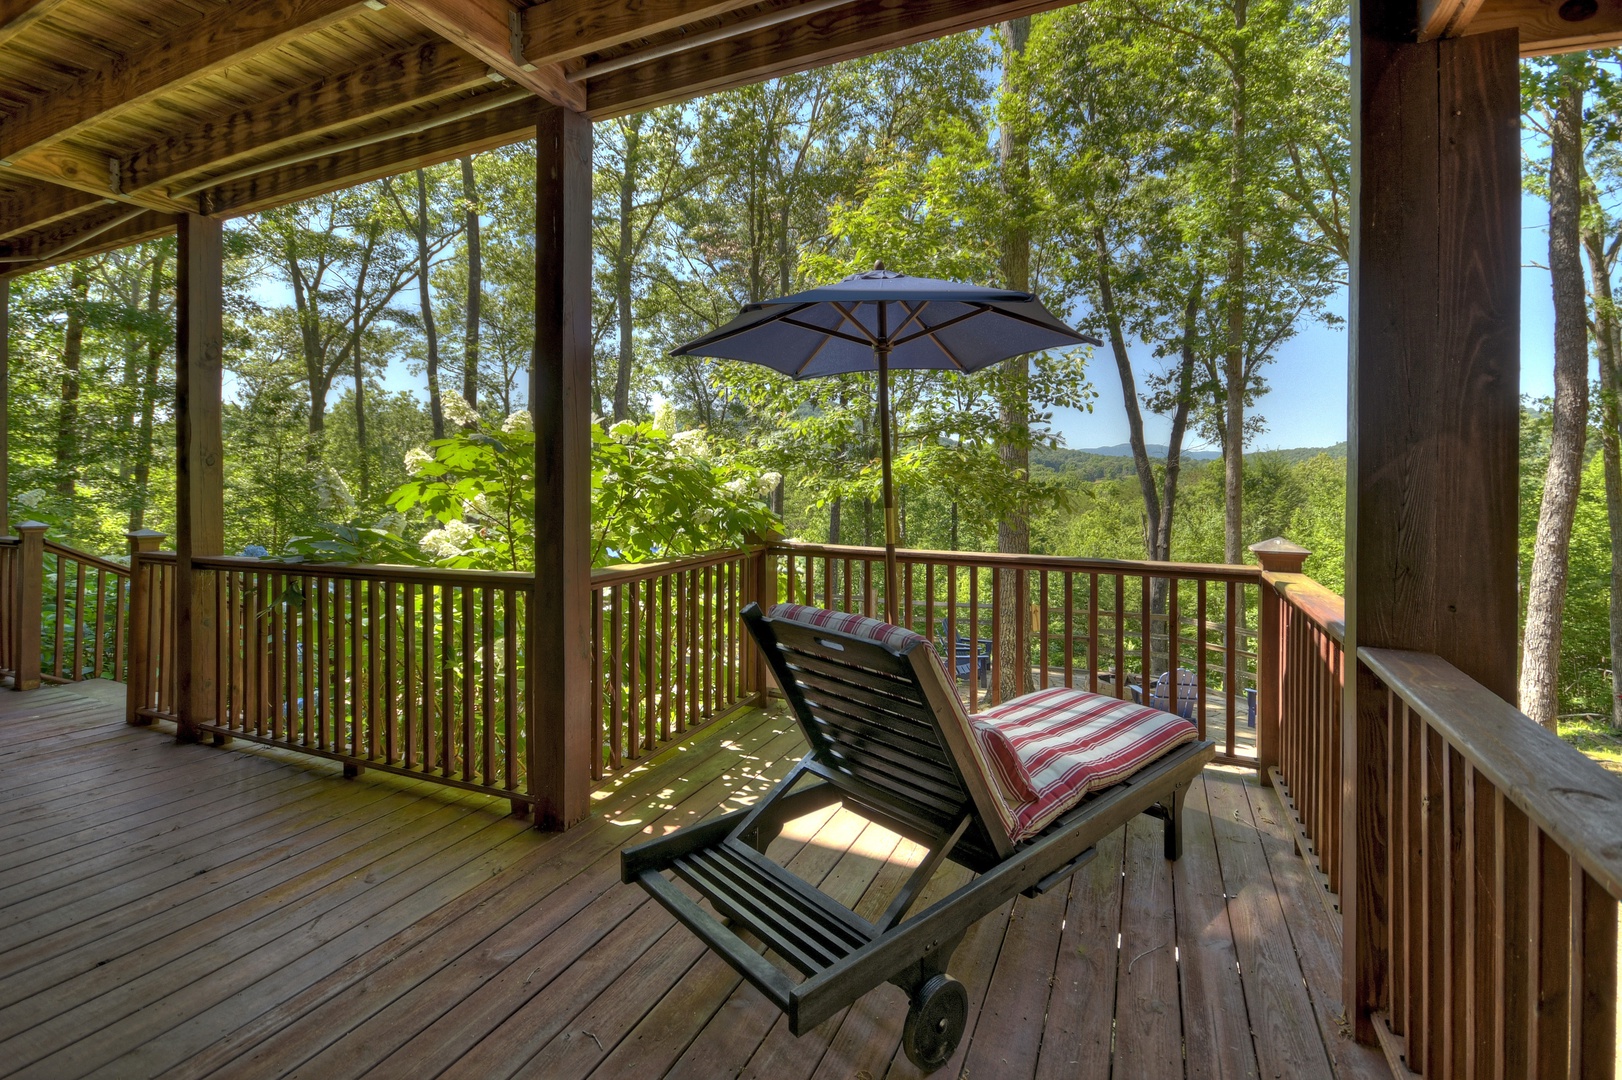 Whippoorwill Calling - Main Level Deck Lounge Chair